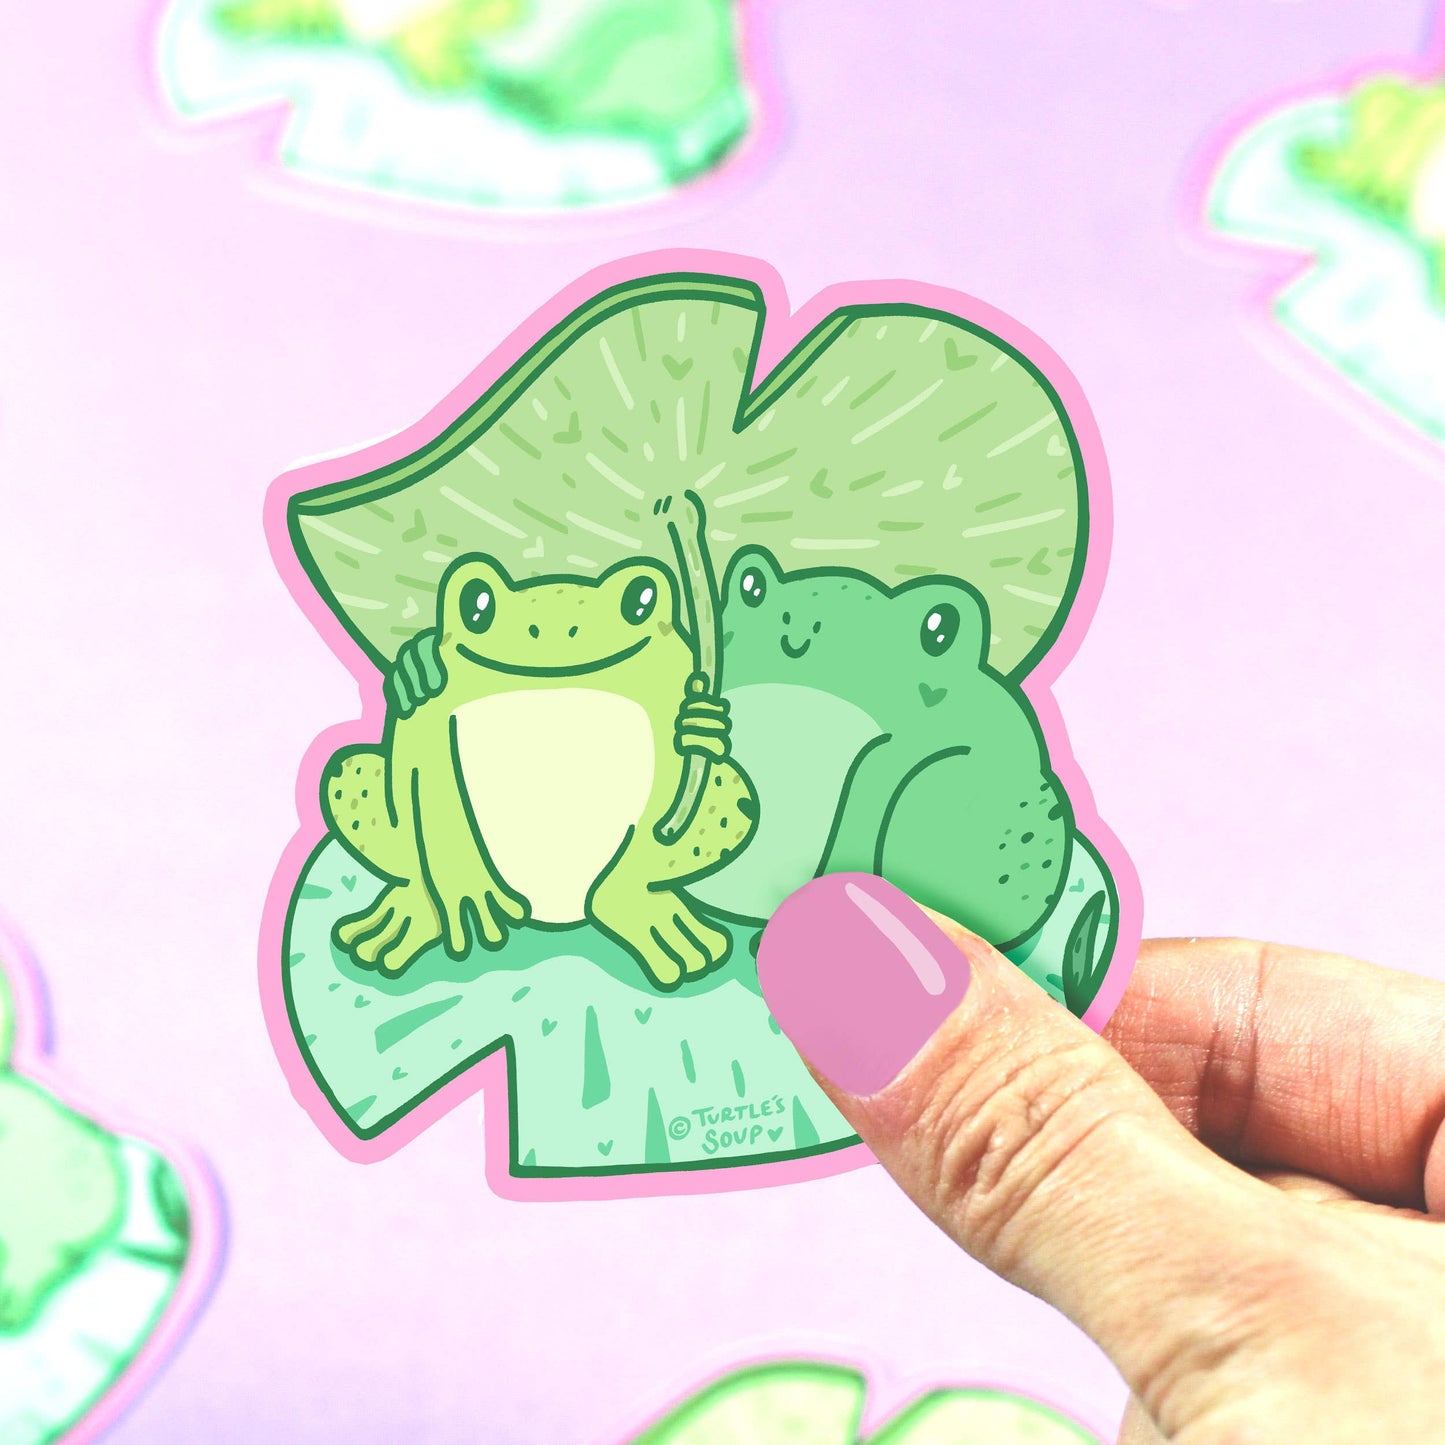 Frogs on a lilypad sticker by Turtle's Soup